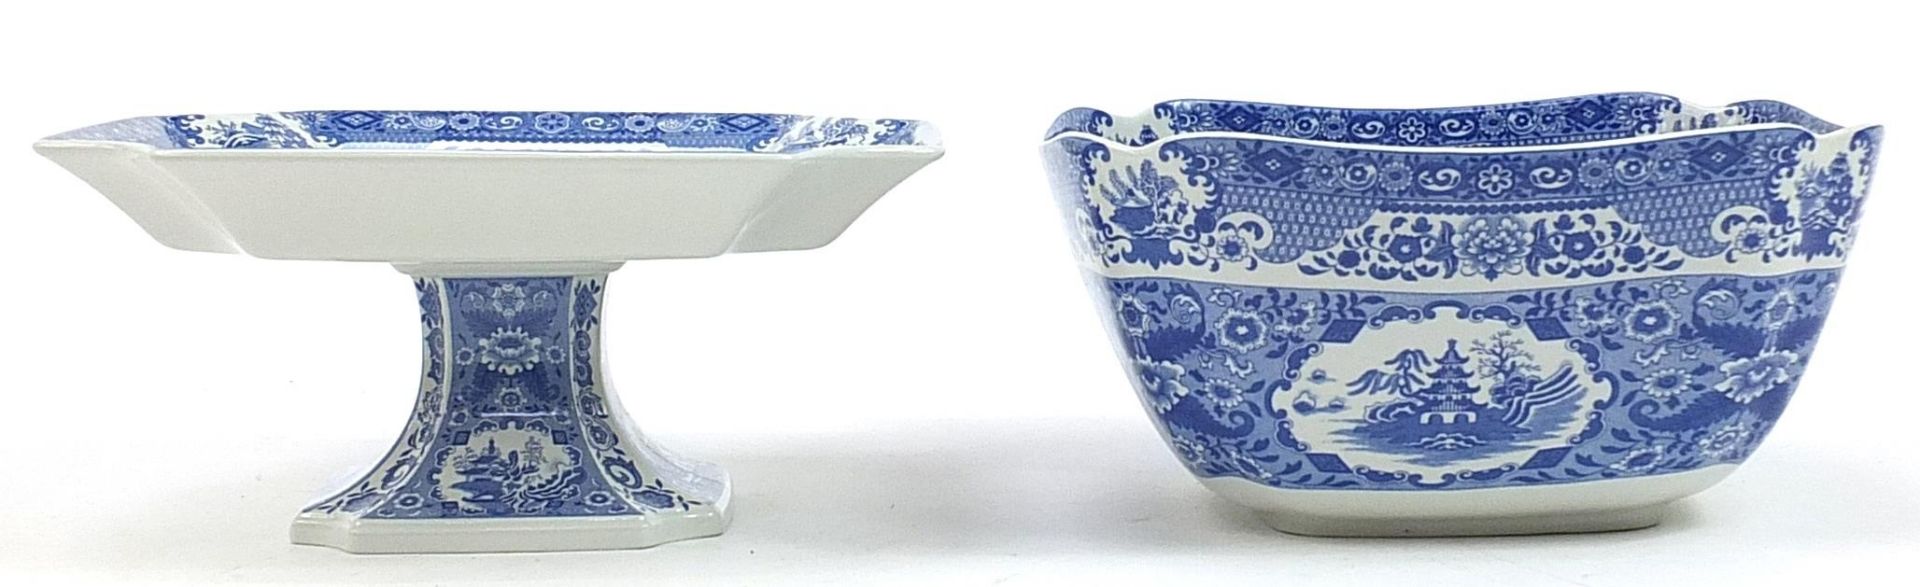 Spode Signature Collection square footed comport and a net bowl, the comport 12cm high x 26cm square - Image 2 of 4